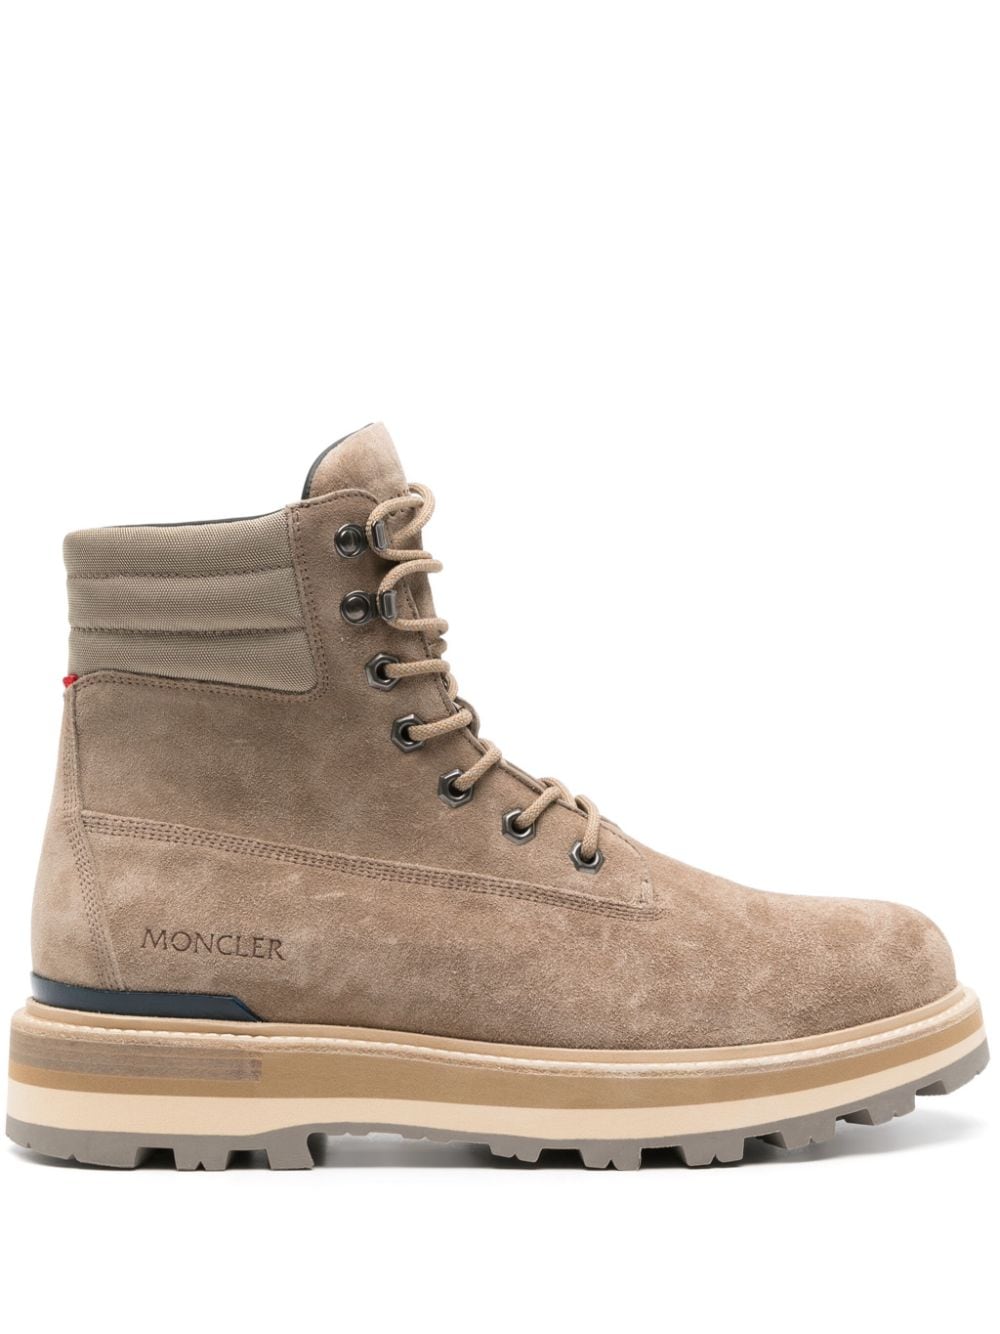 Moncler Peka Suede Hiking Boots In Neutrals